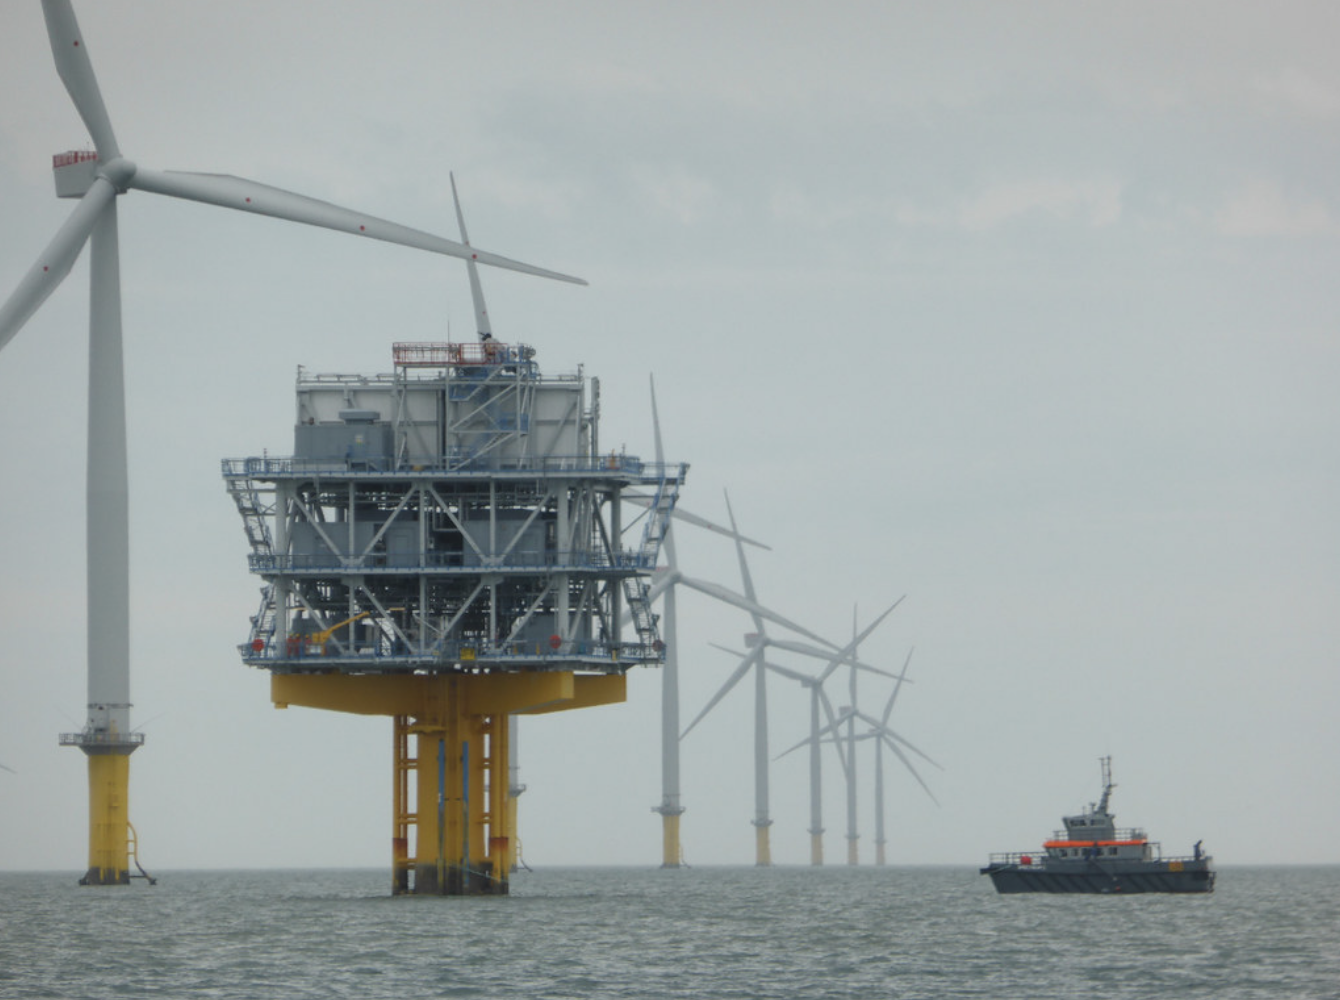 A gray day at the London Array, one of the world's largest offshore windfarms. The largest offshore wind farms are currently in northern Europe, especially in the United Kingdom and Germany, which together account for over two-thirds of the total offshore wind power installed worldwide. June 12, 2016 (Photo by pshab) Creative Commons license via Flickr